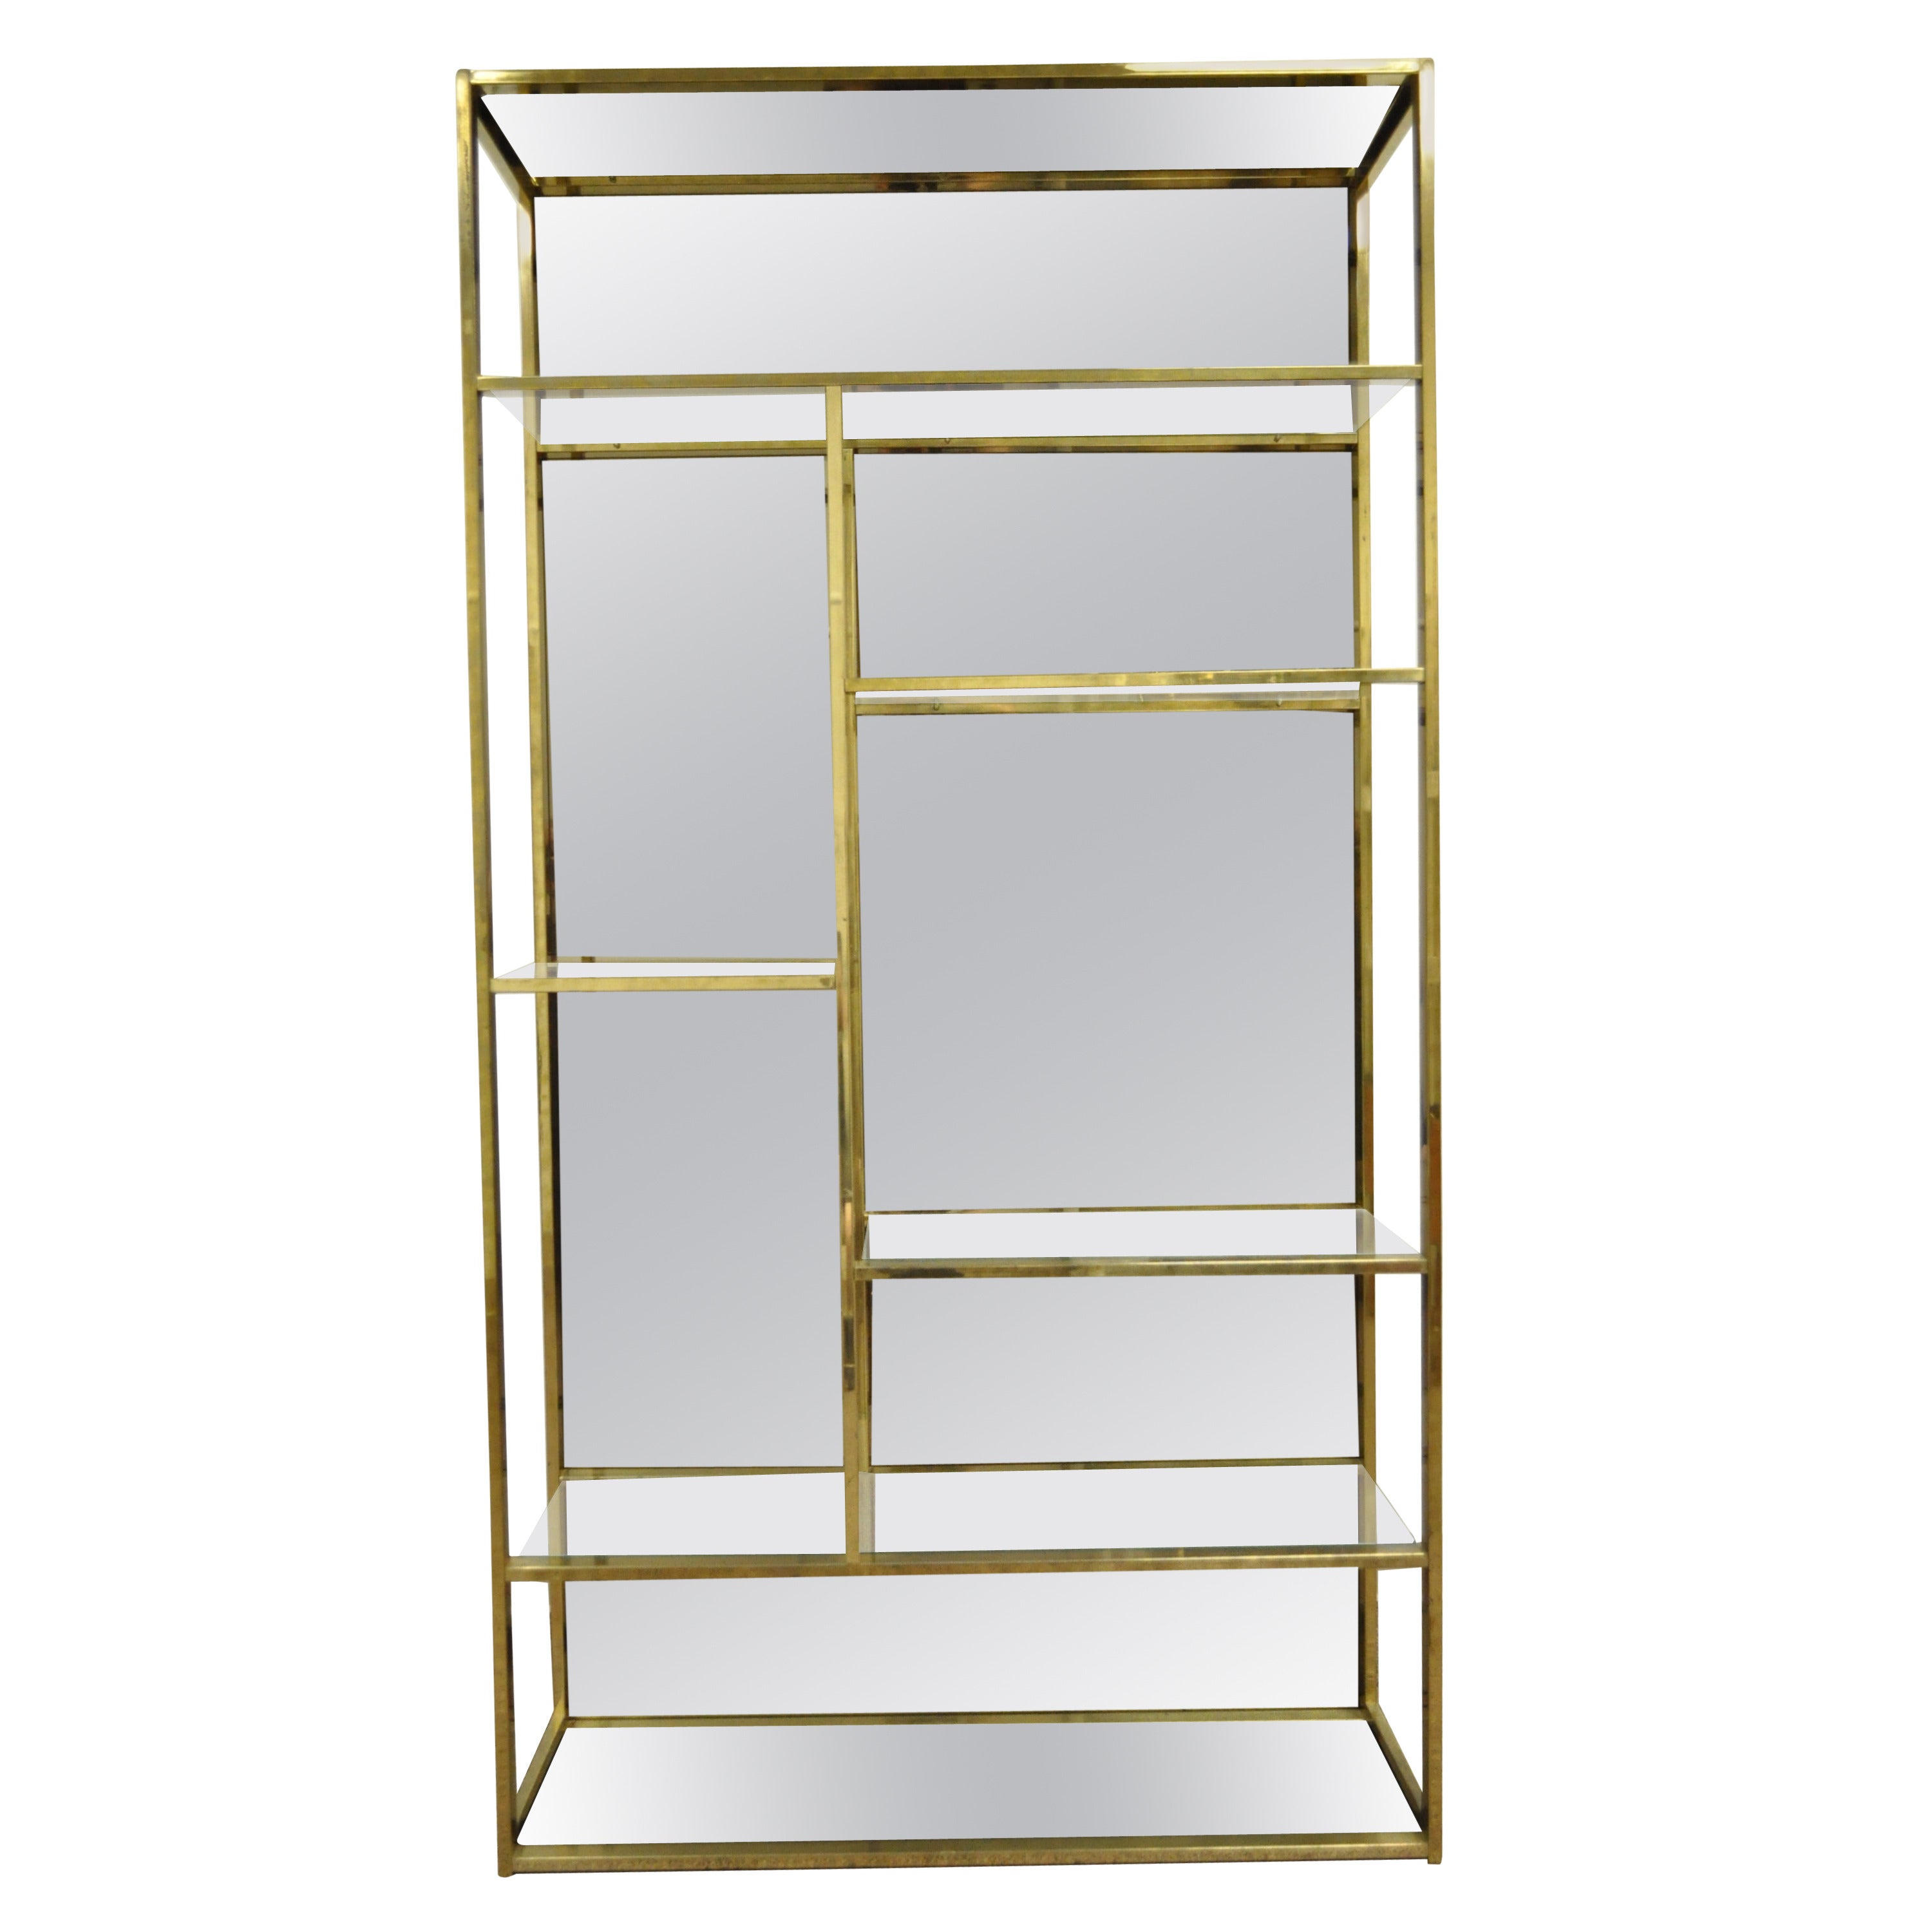 Burnished Brass Plated Etagere with Amber Mirror Attributed to Milo Baughman